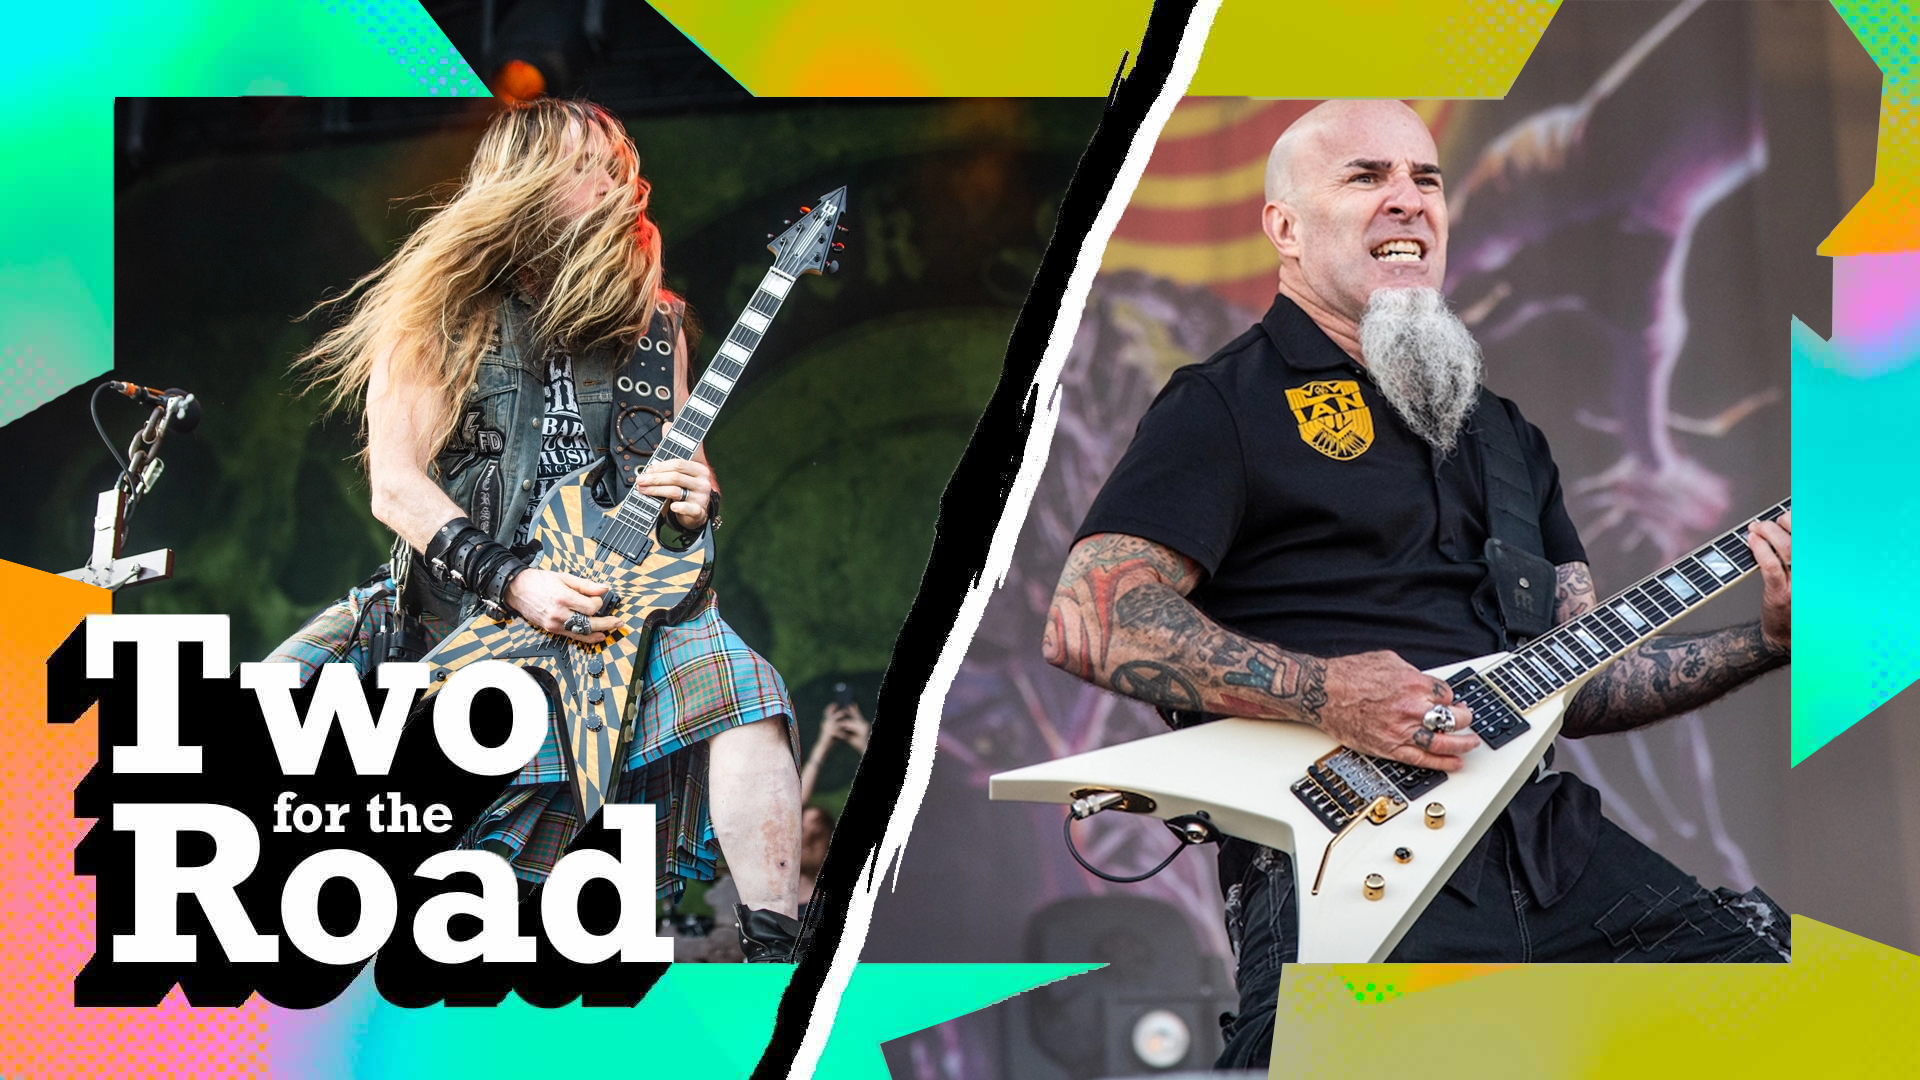 Two for the Road: Black Label Society's Zakk Wylde and Anthrax's Scott Ian Talk Pizza, Ozzy, and More